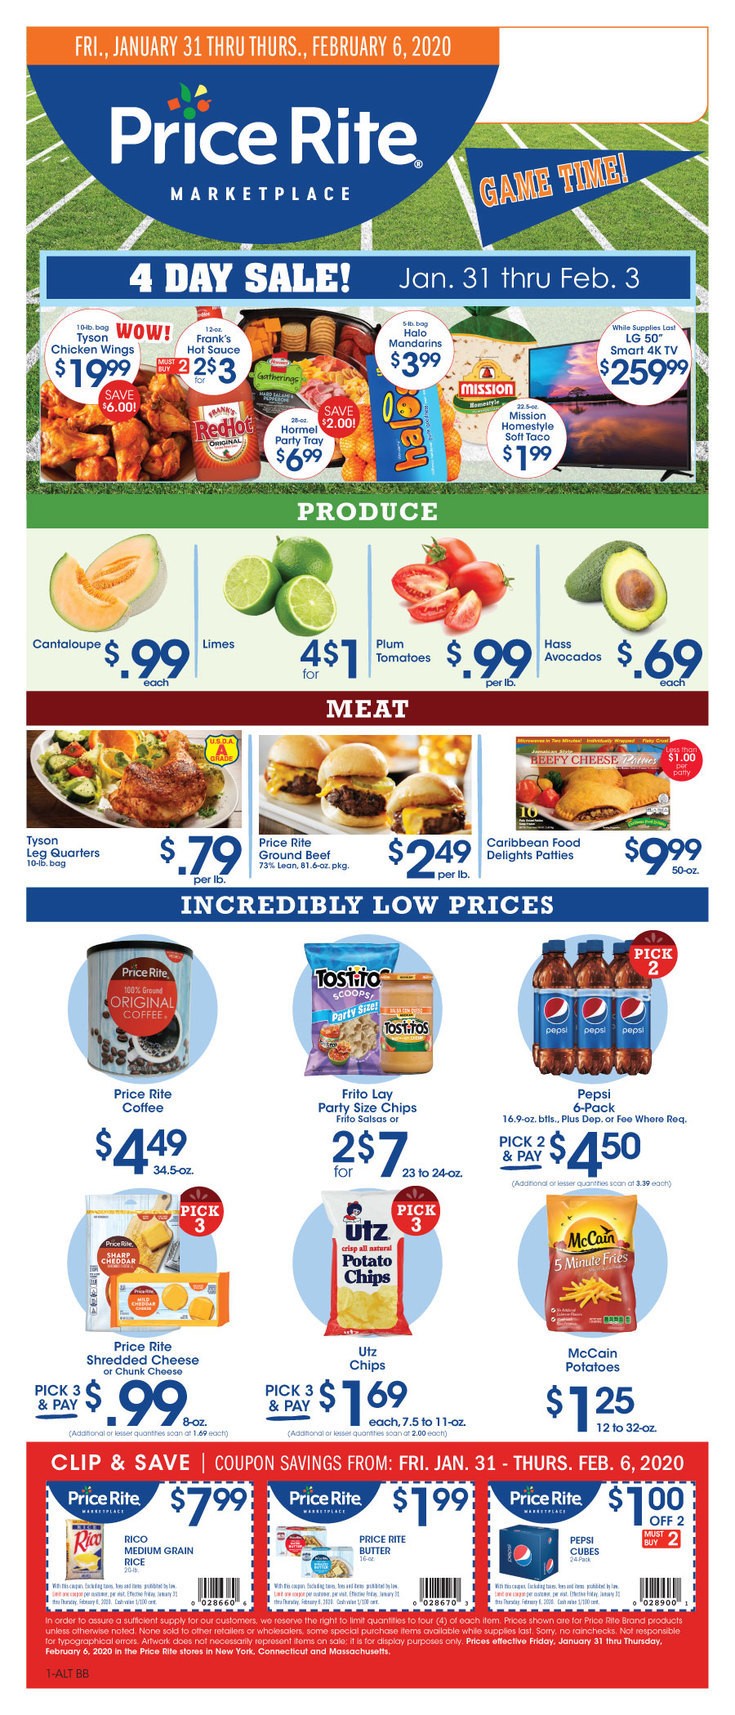 Price Rite Weekly Ad from January 31